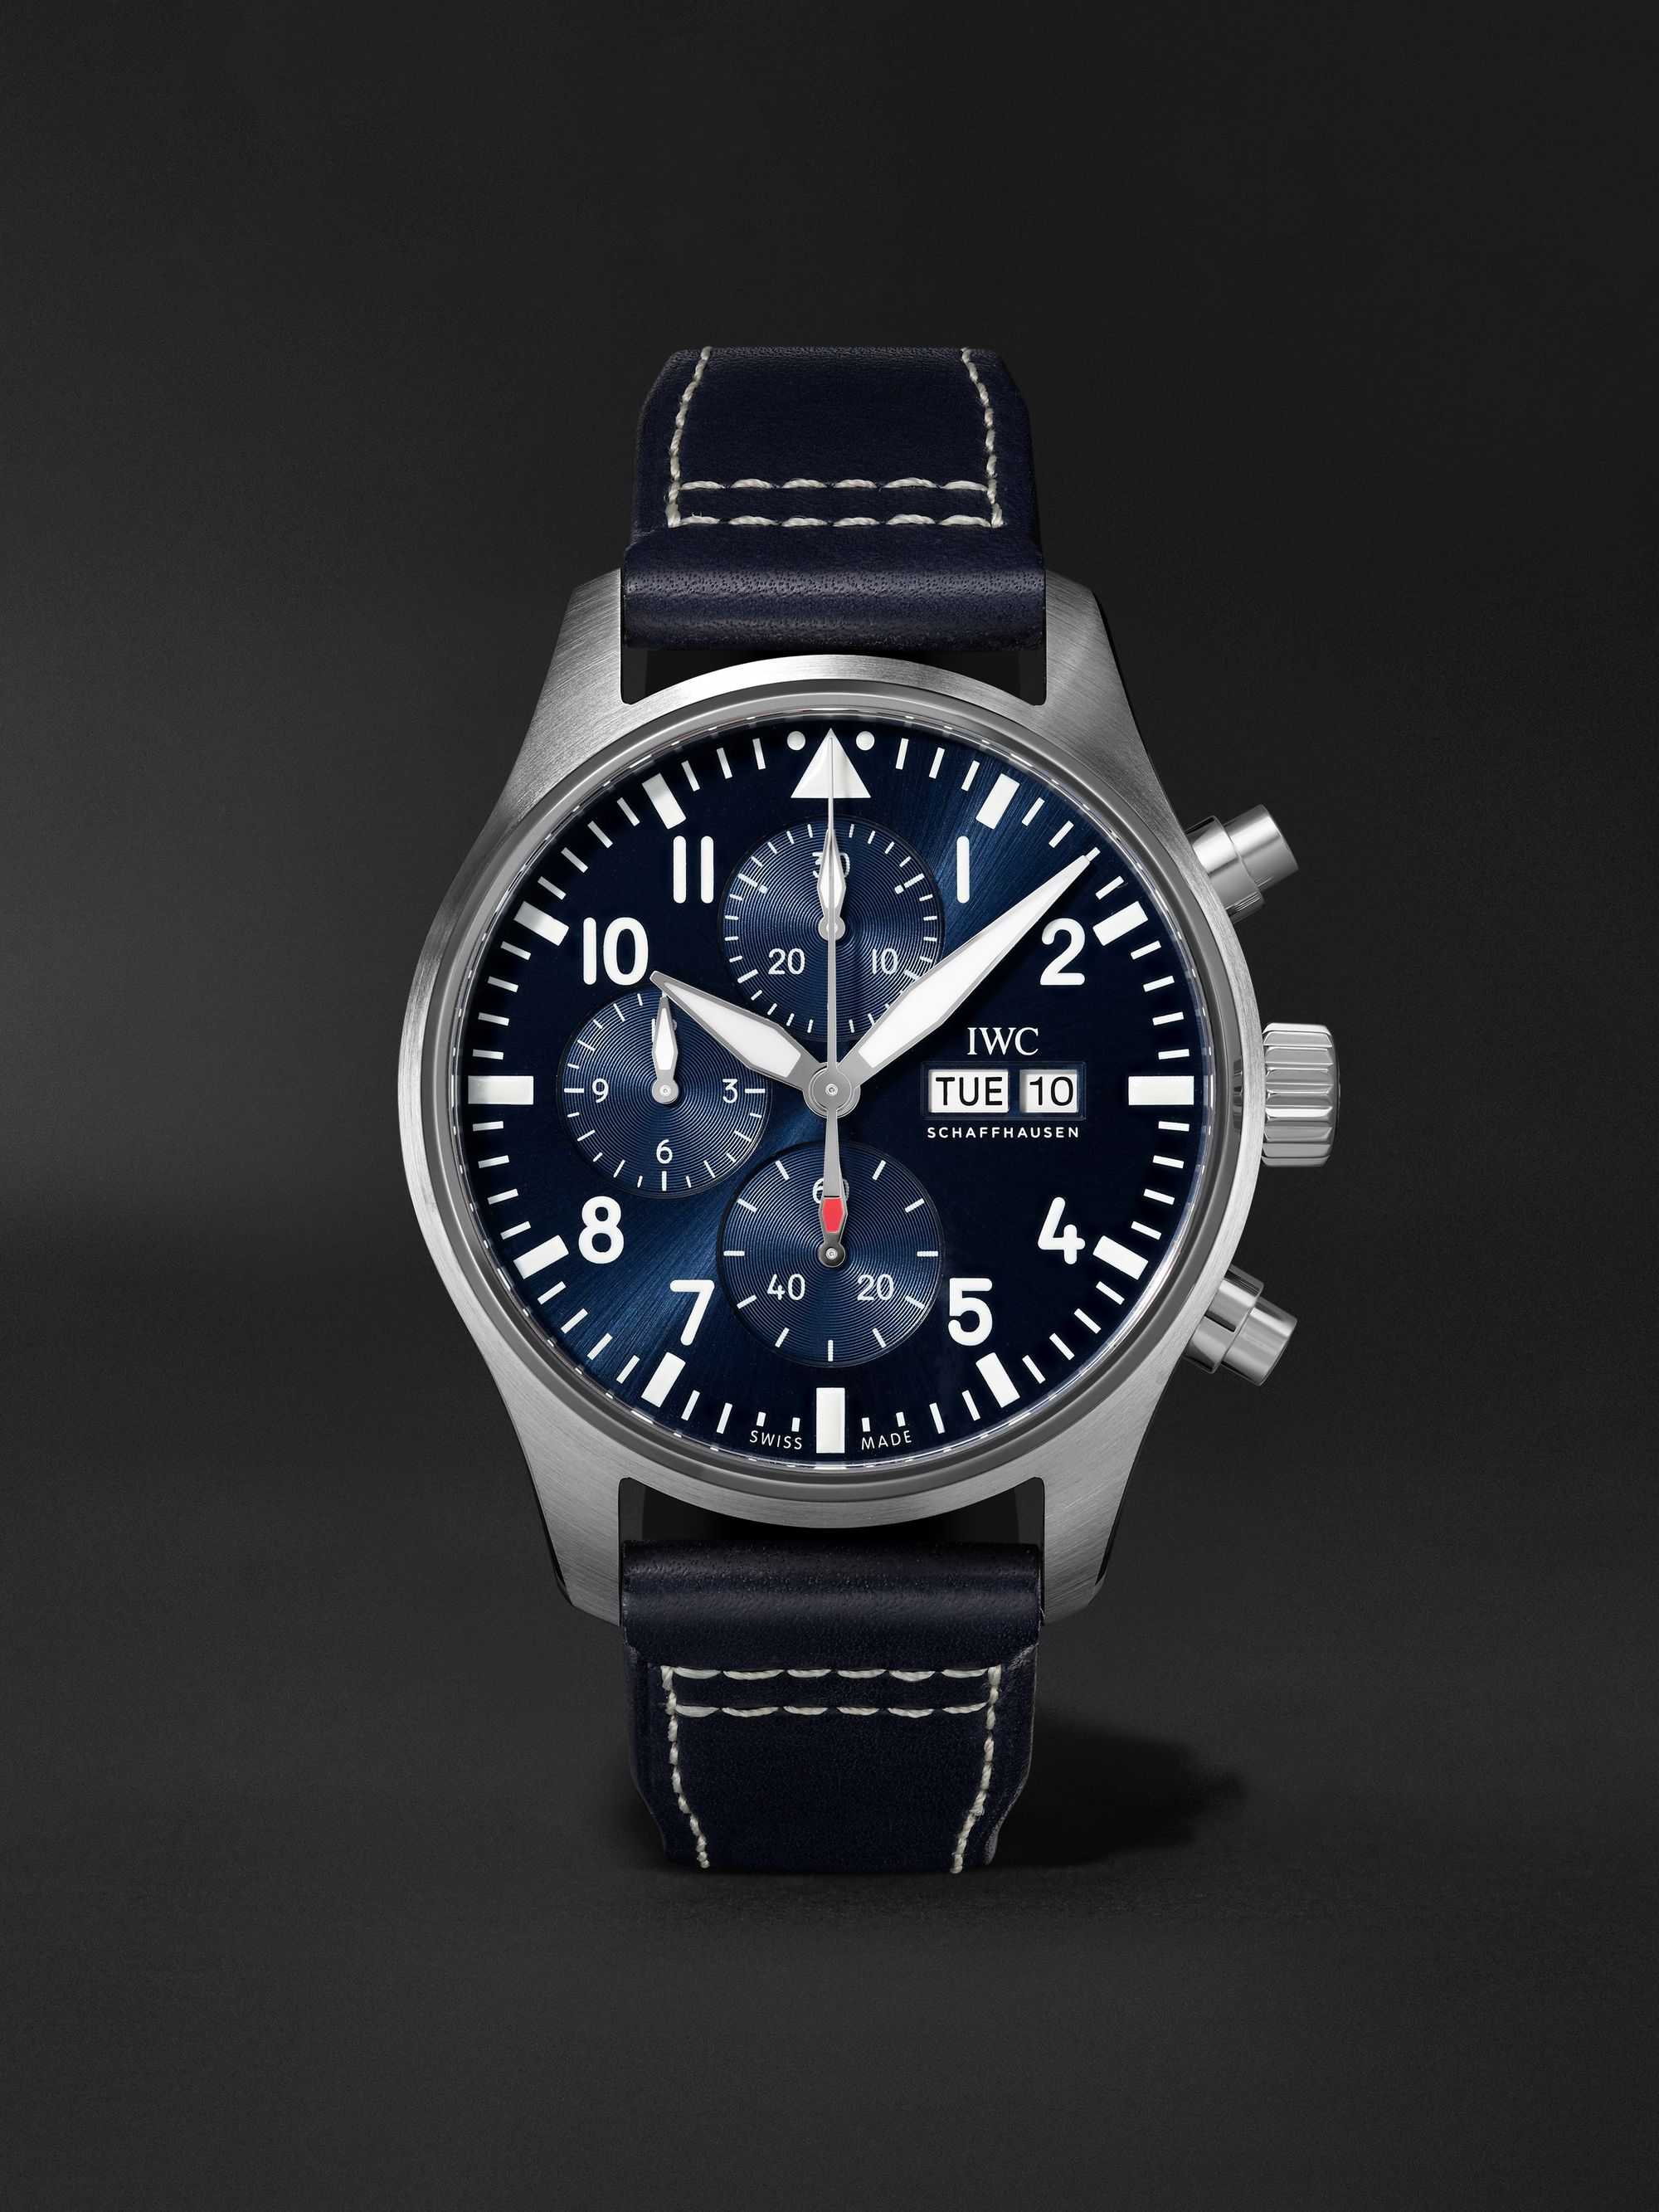 IWC SCHAFFHAUSEN Pilot's Automatic Chronograph 43mm Stainless Steel and Leather Watch, Ref. No. IWIW378003